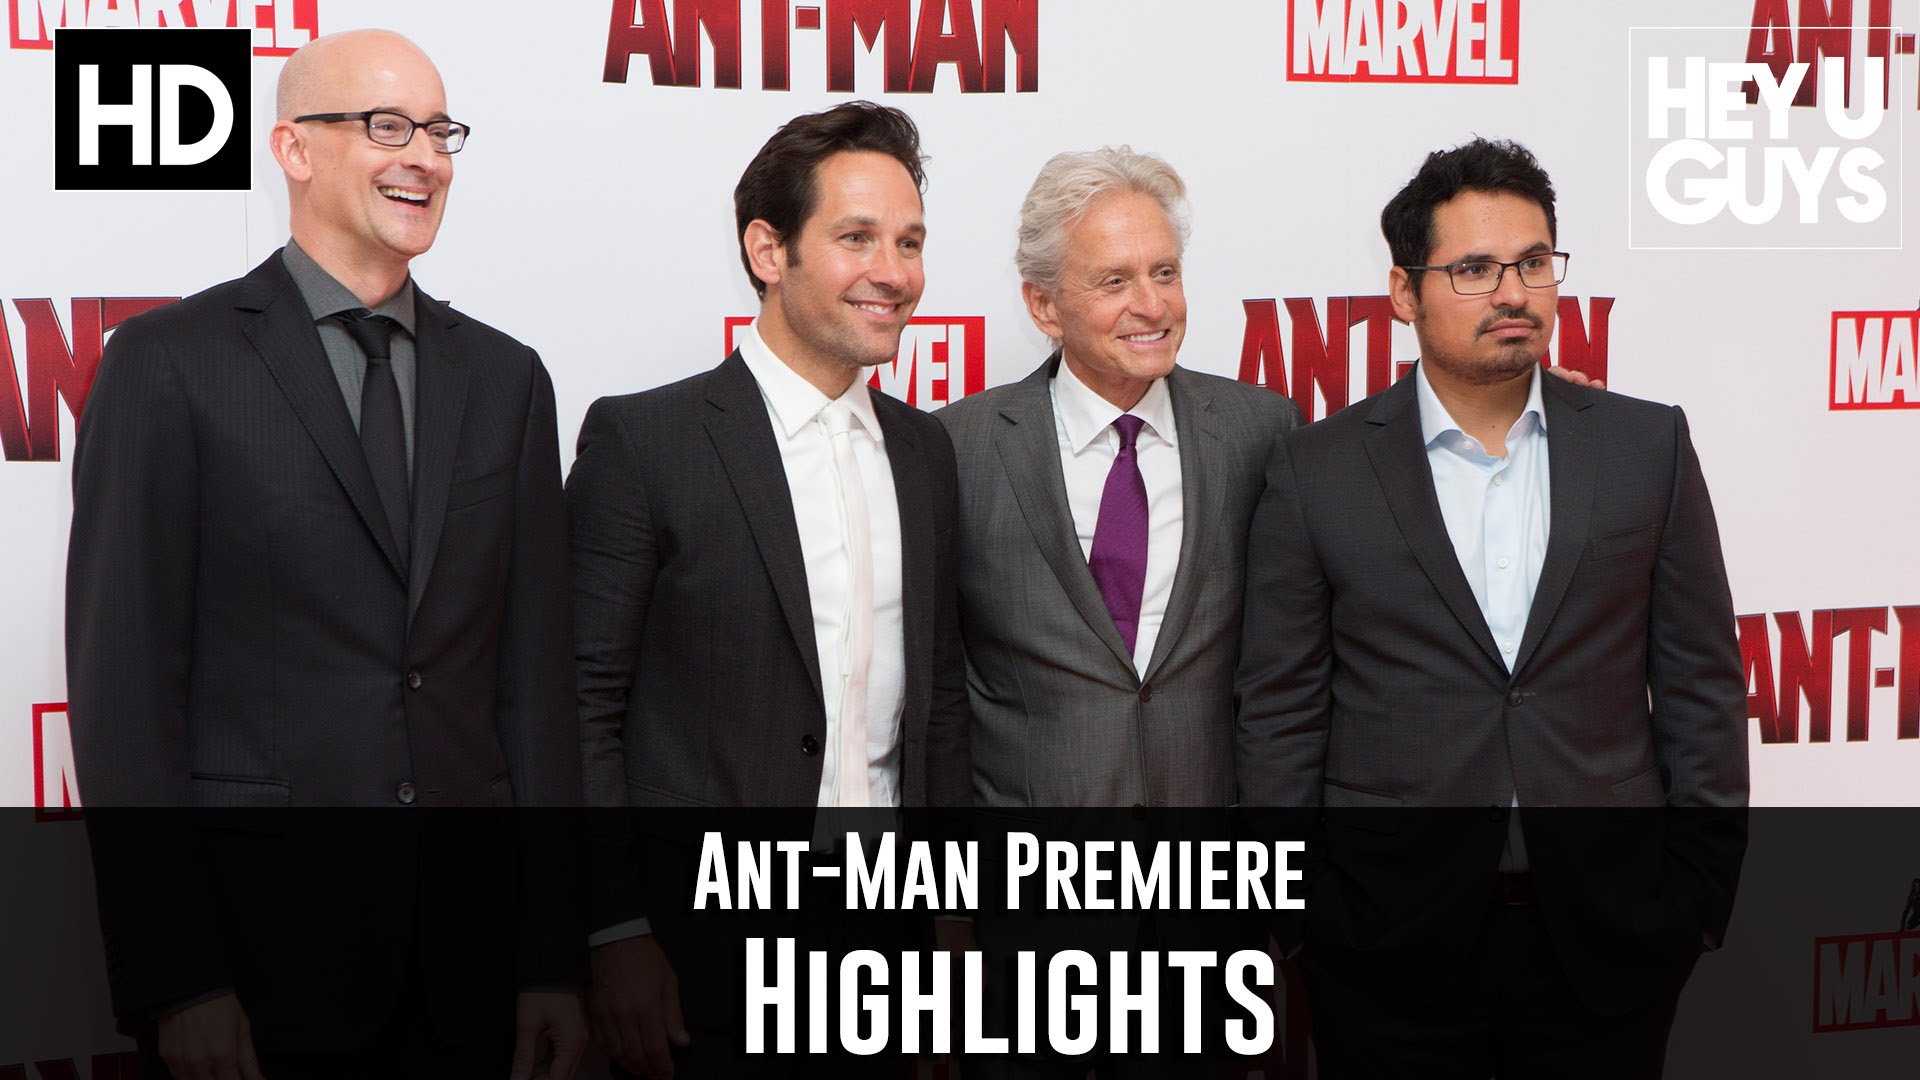 Ant-Man Premiere Highlights / Arrivals